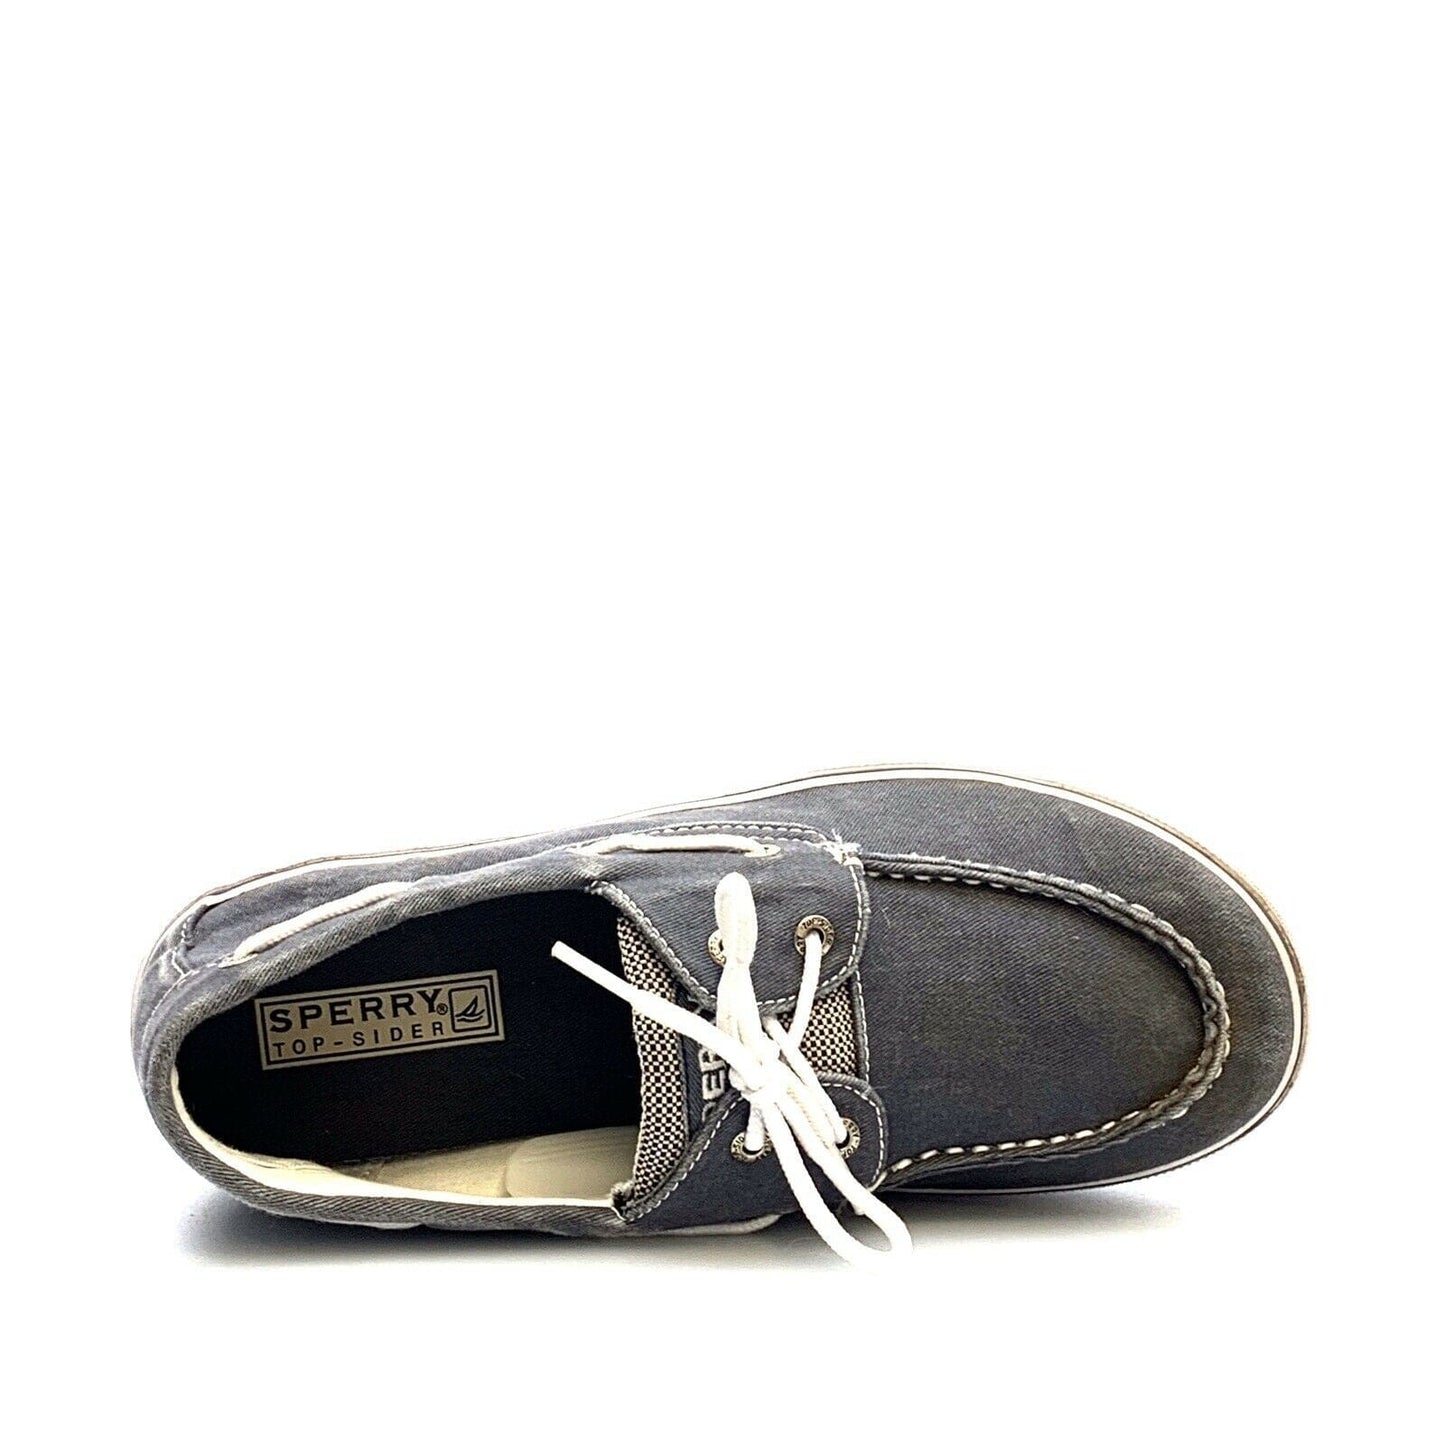 Sperry Top Sider Womens Size 6M Boat Flats Lace Up Casual Shoes, Gray - parsimonyshoppes